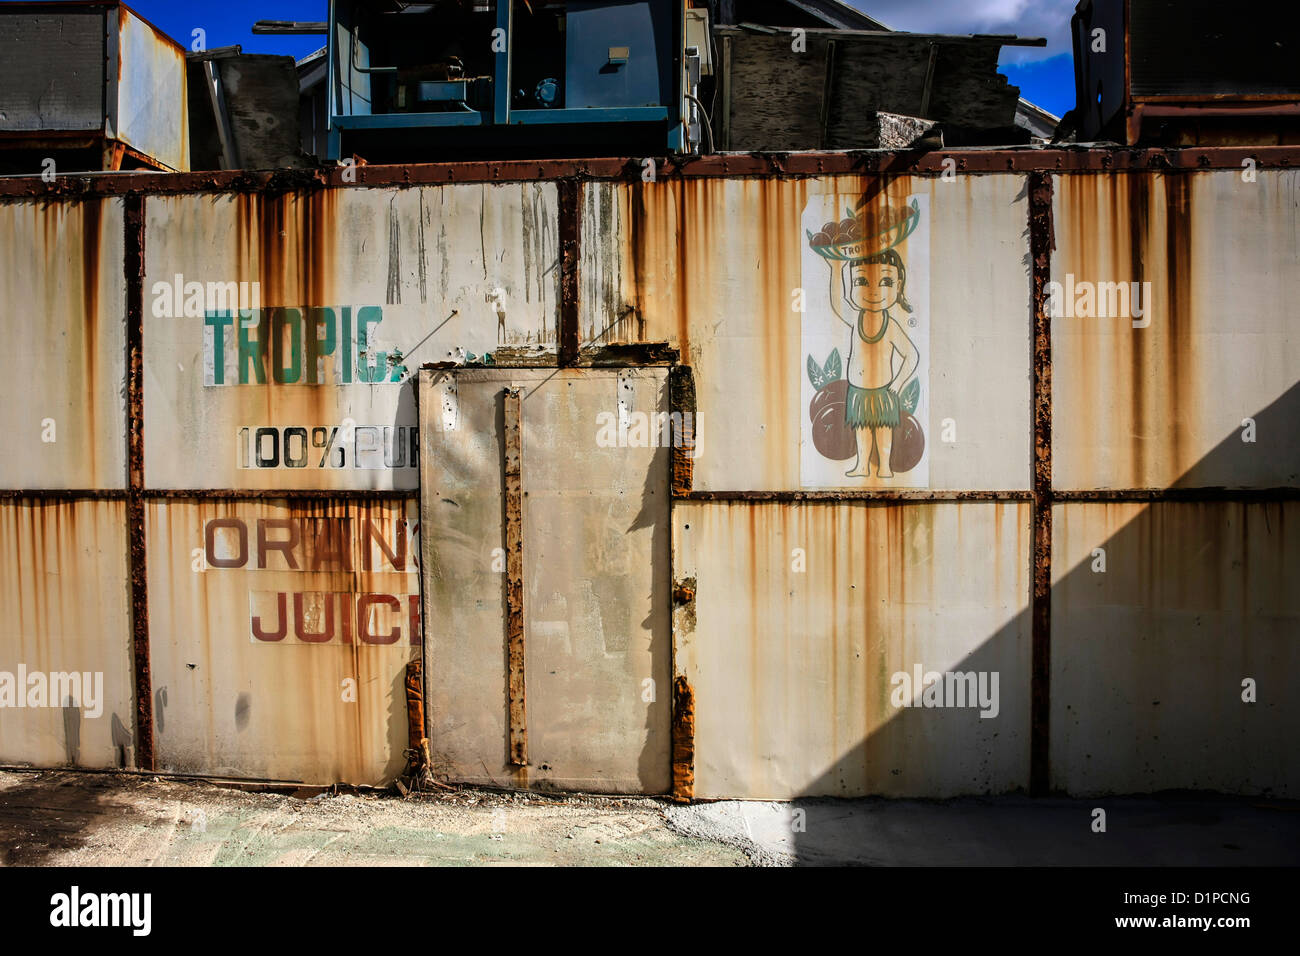 Old rusting disused Tropicana cargo container turned into a workshop at Cortez FL Stock Photo